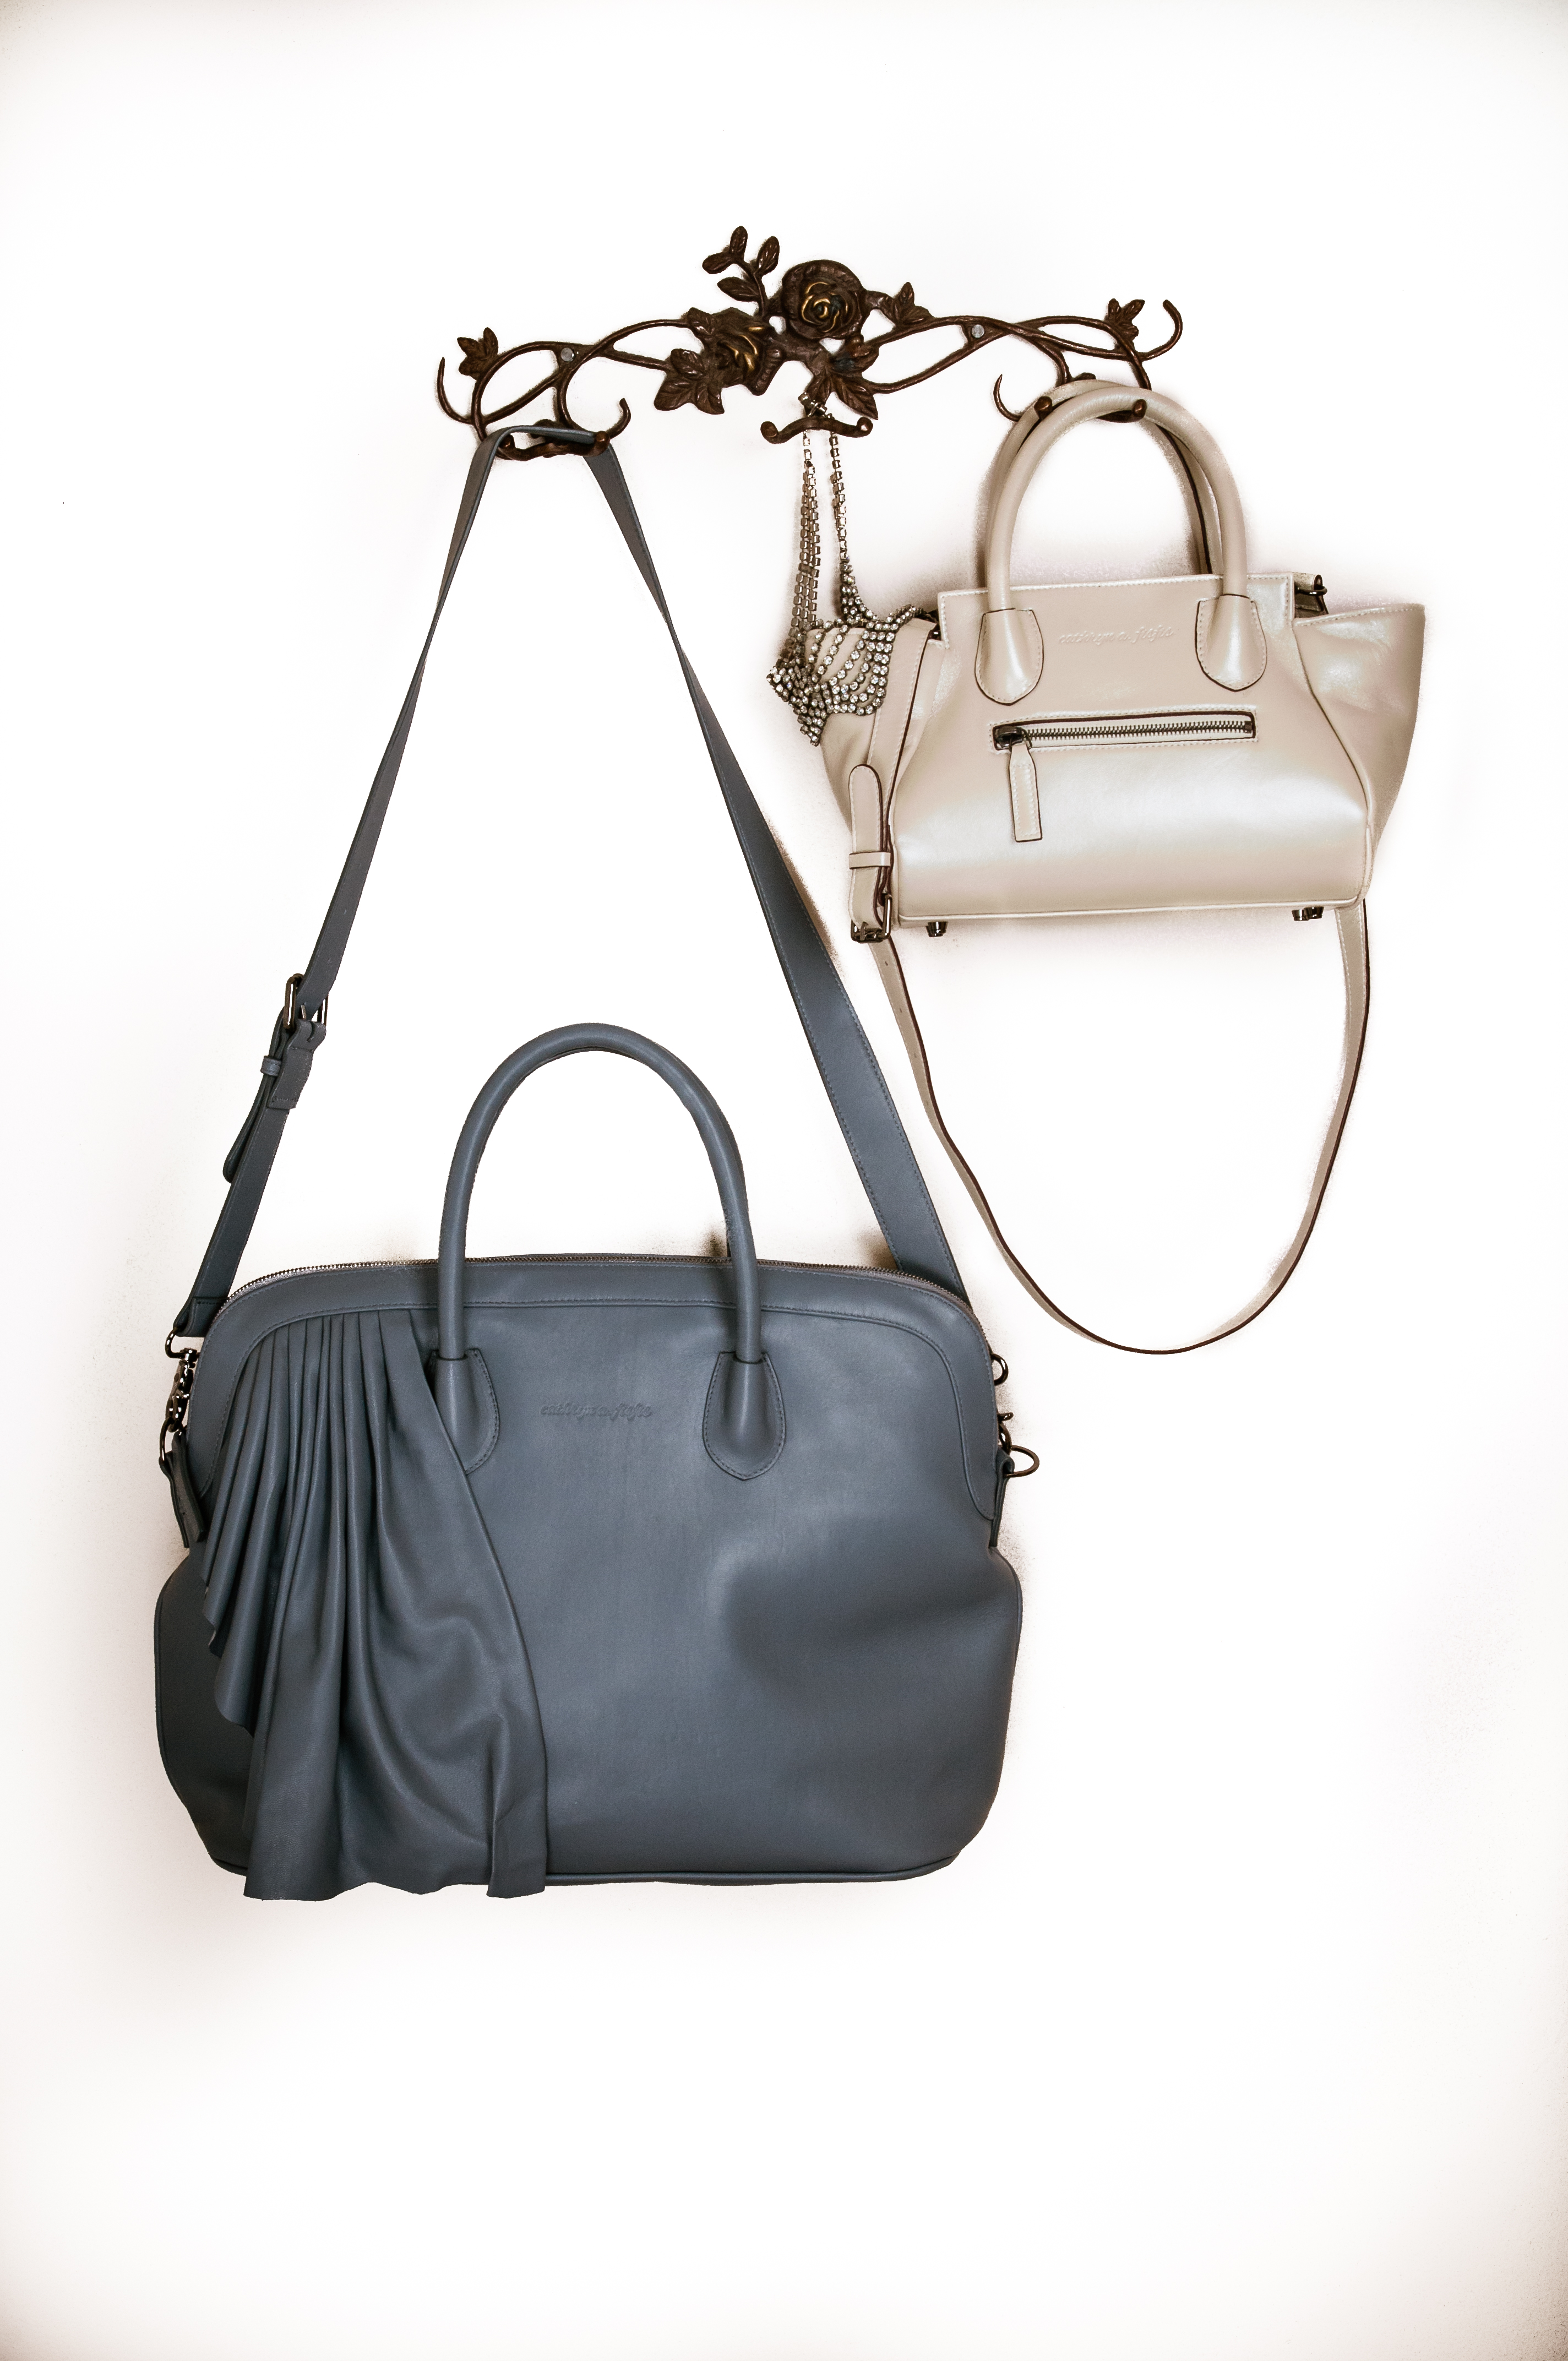 Fashionable Diaper Bags for Moms Everywhere'